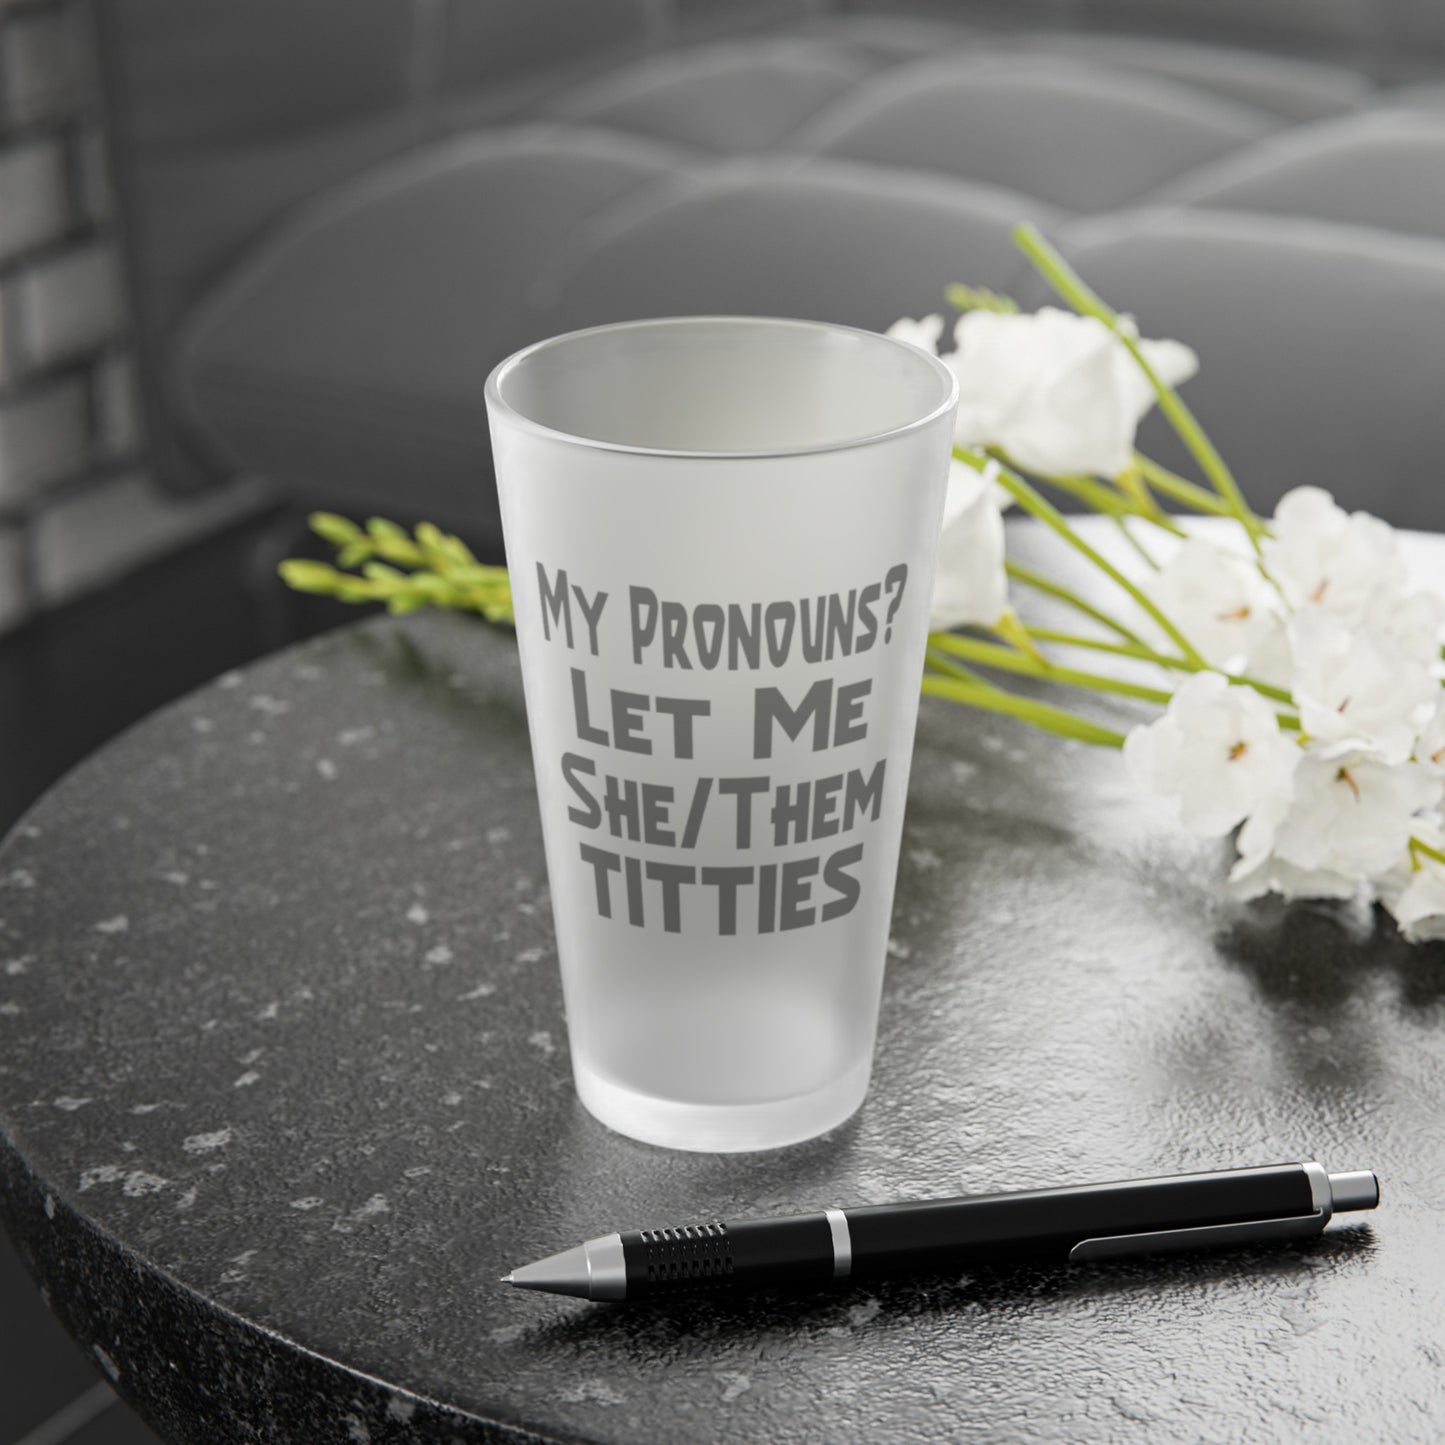 My Pronouns? Let Me She/Them Titties - Frosted Pint Glass, 16oz